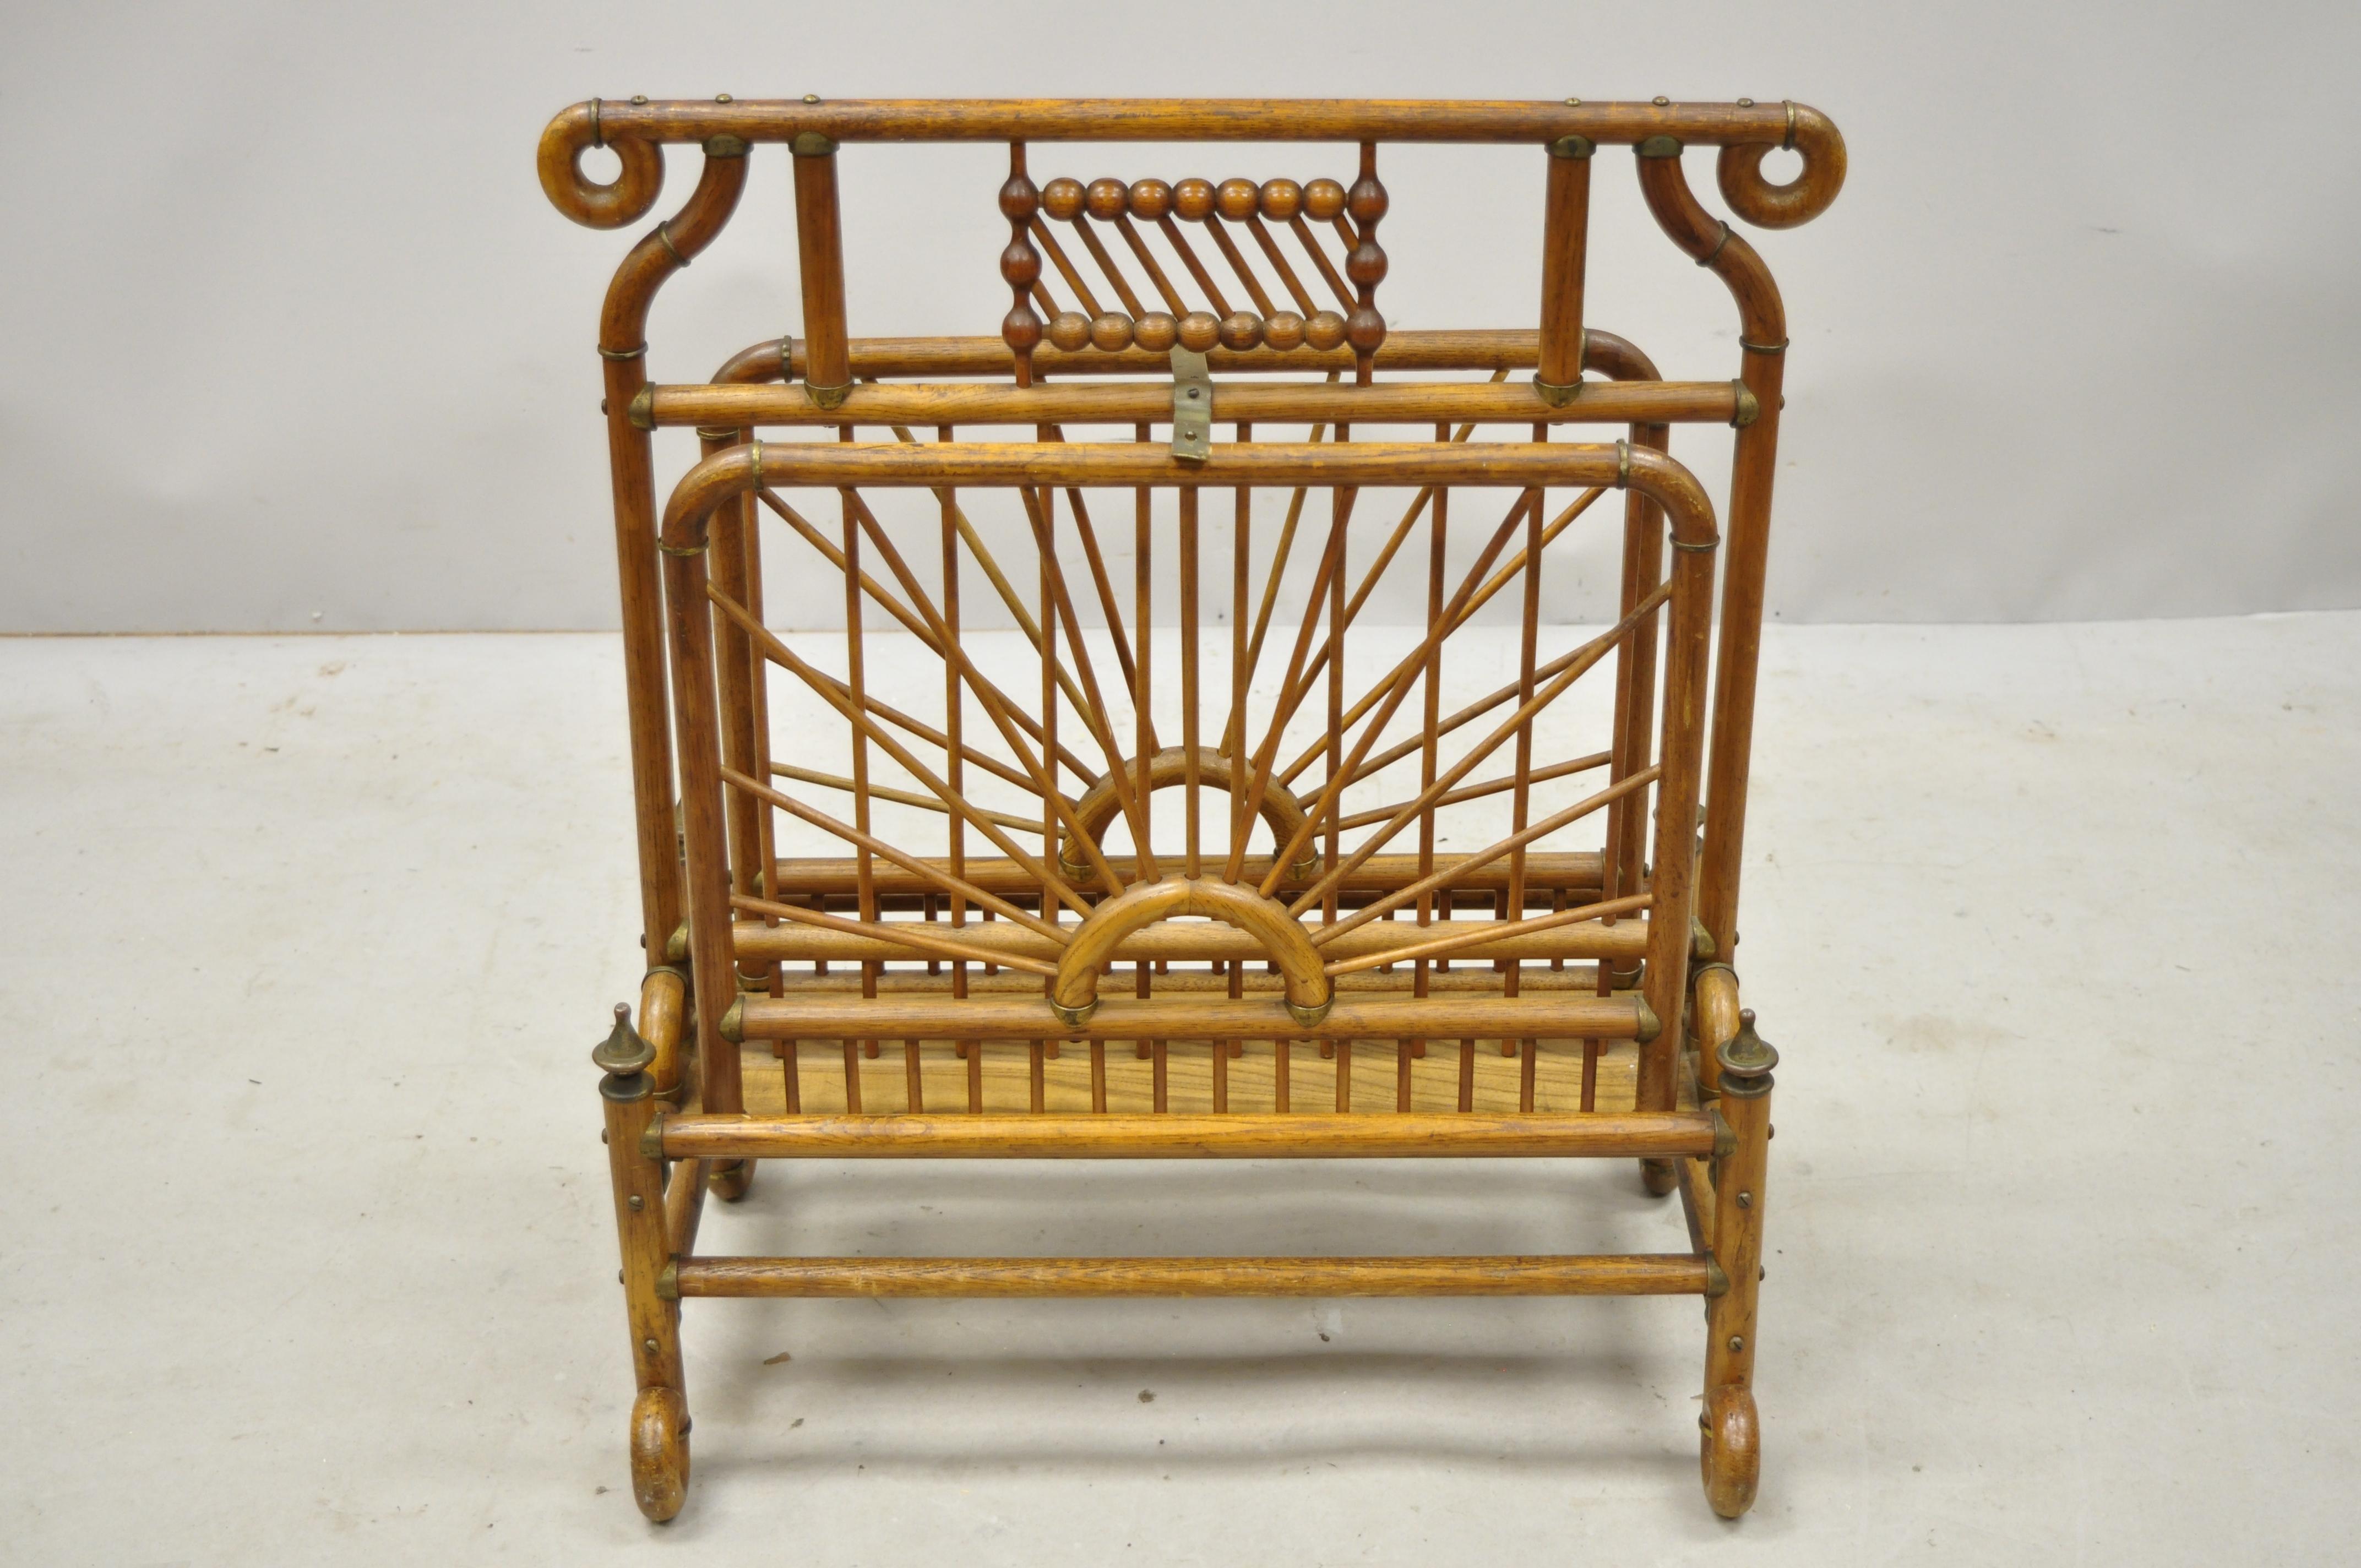 19th century Victorian antique bentwood stick and ball drop side magazine rack. Item features brass accents, oak bentwood frame, drop sides, very nice antique item, circa late 19th century. Measurements: 25